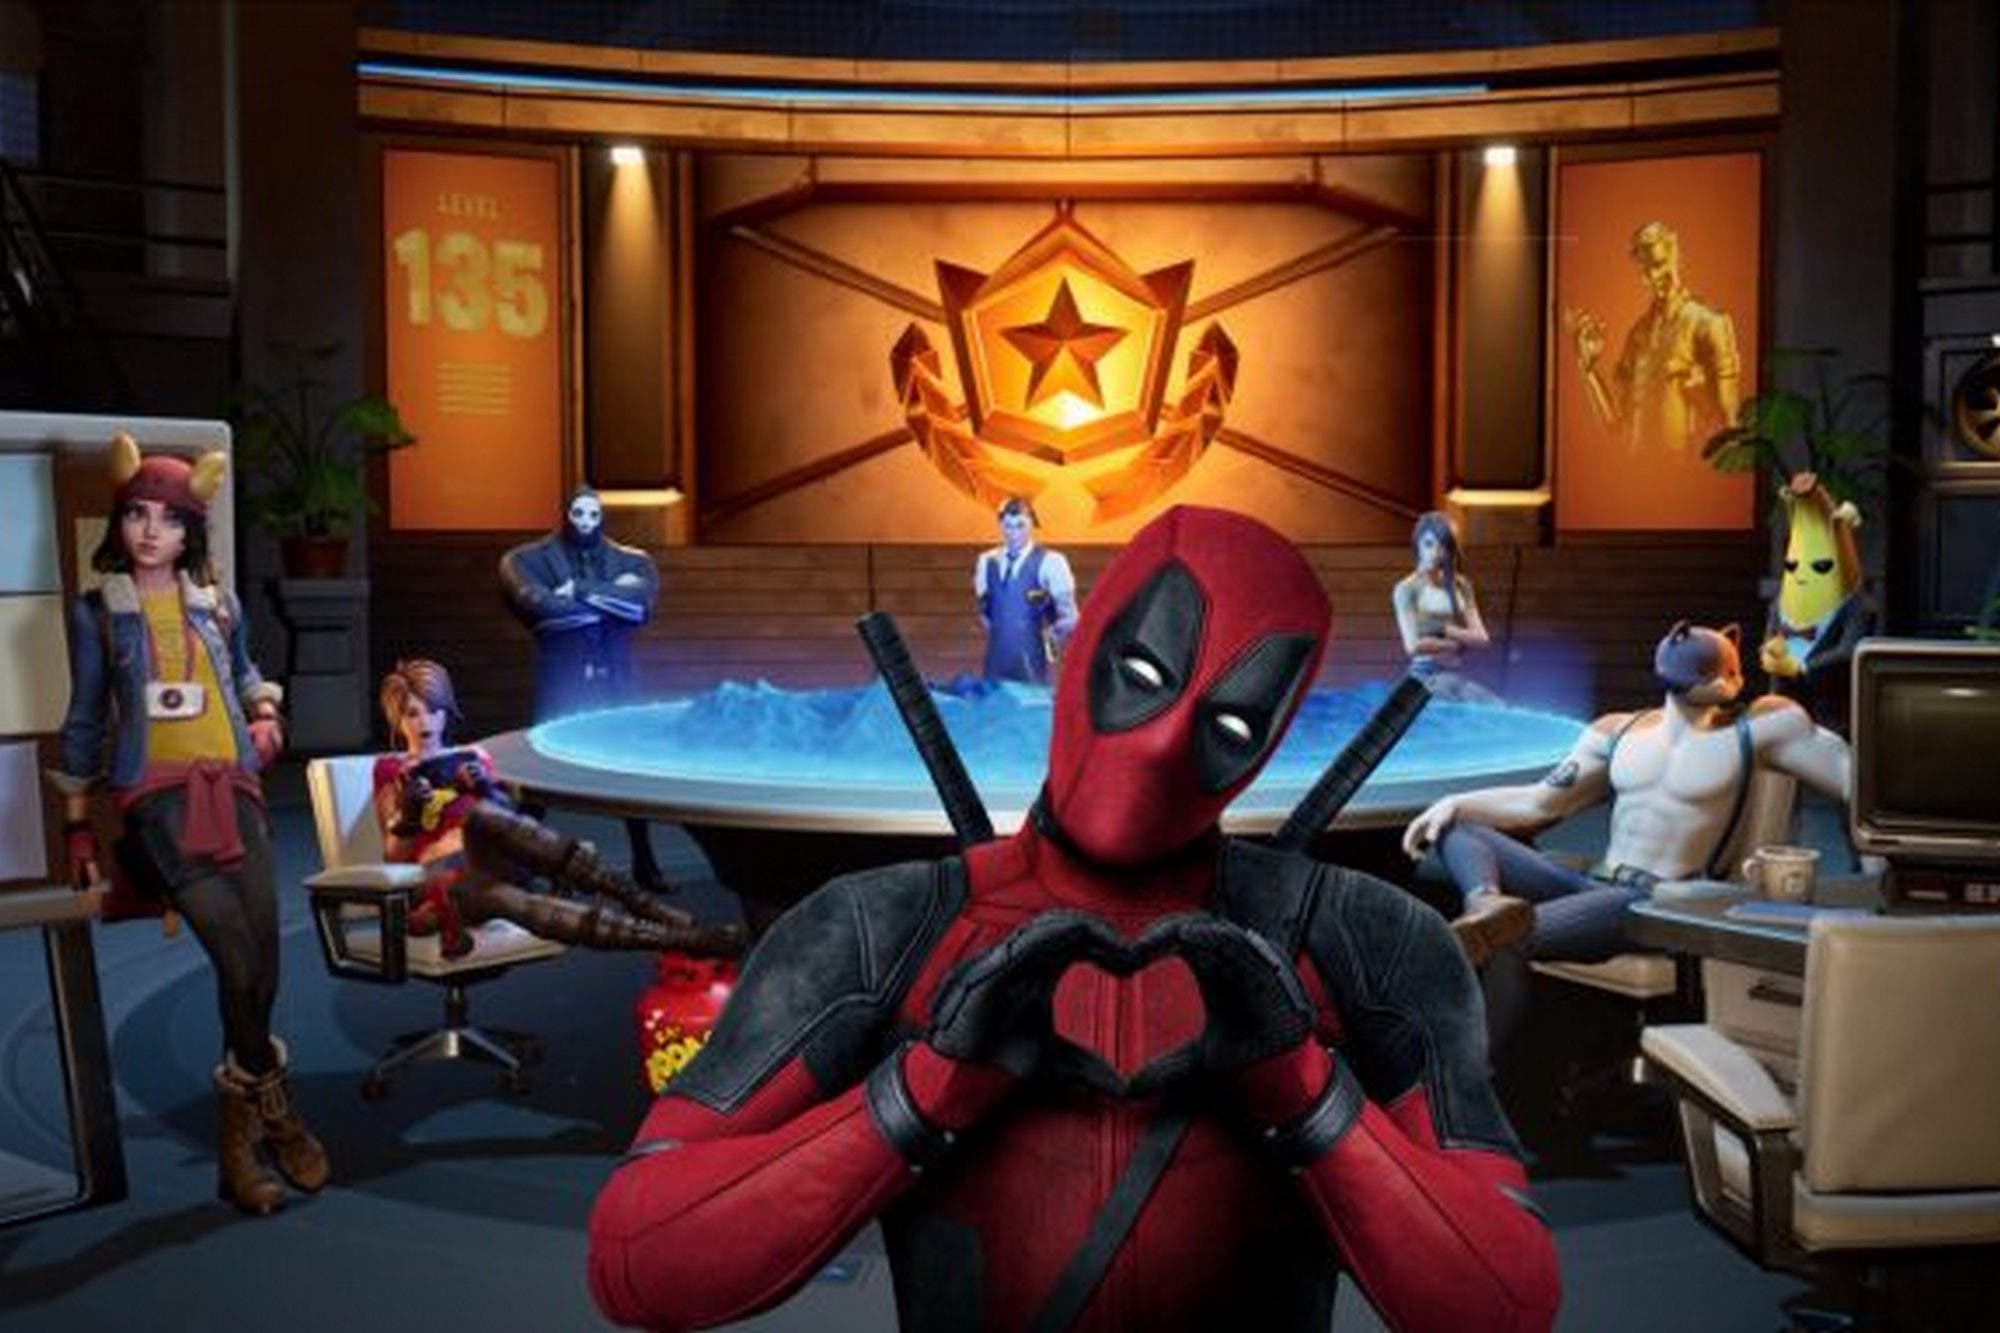 Deadpool arrives at Fortnite with secret challenges for the new season